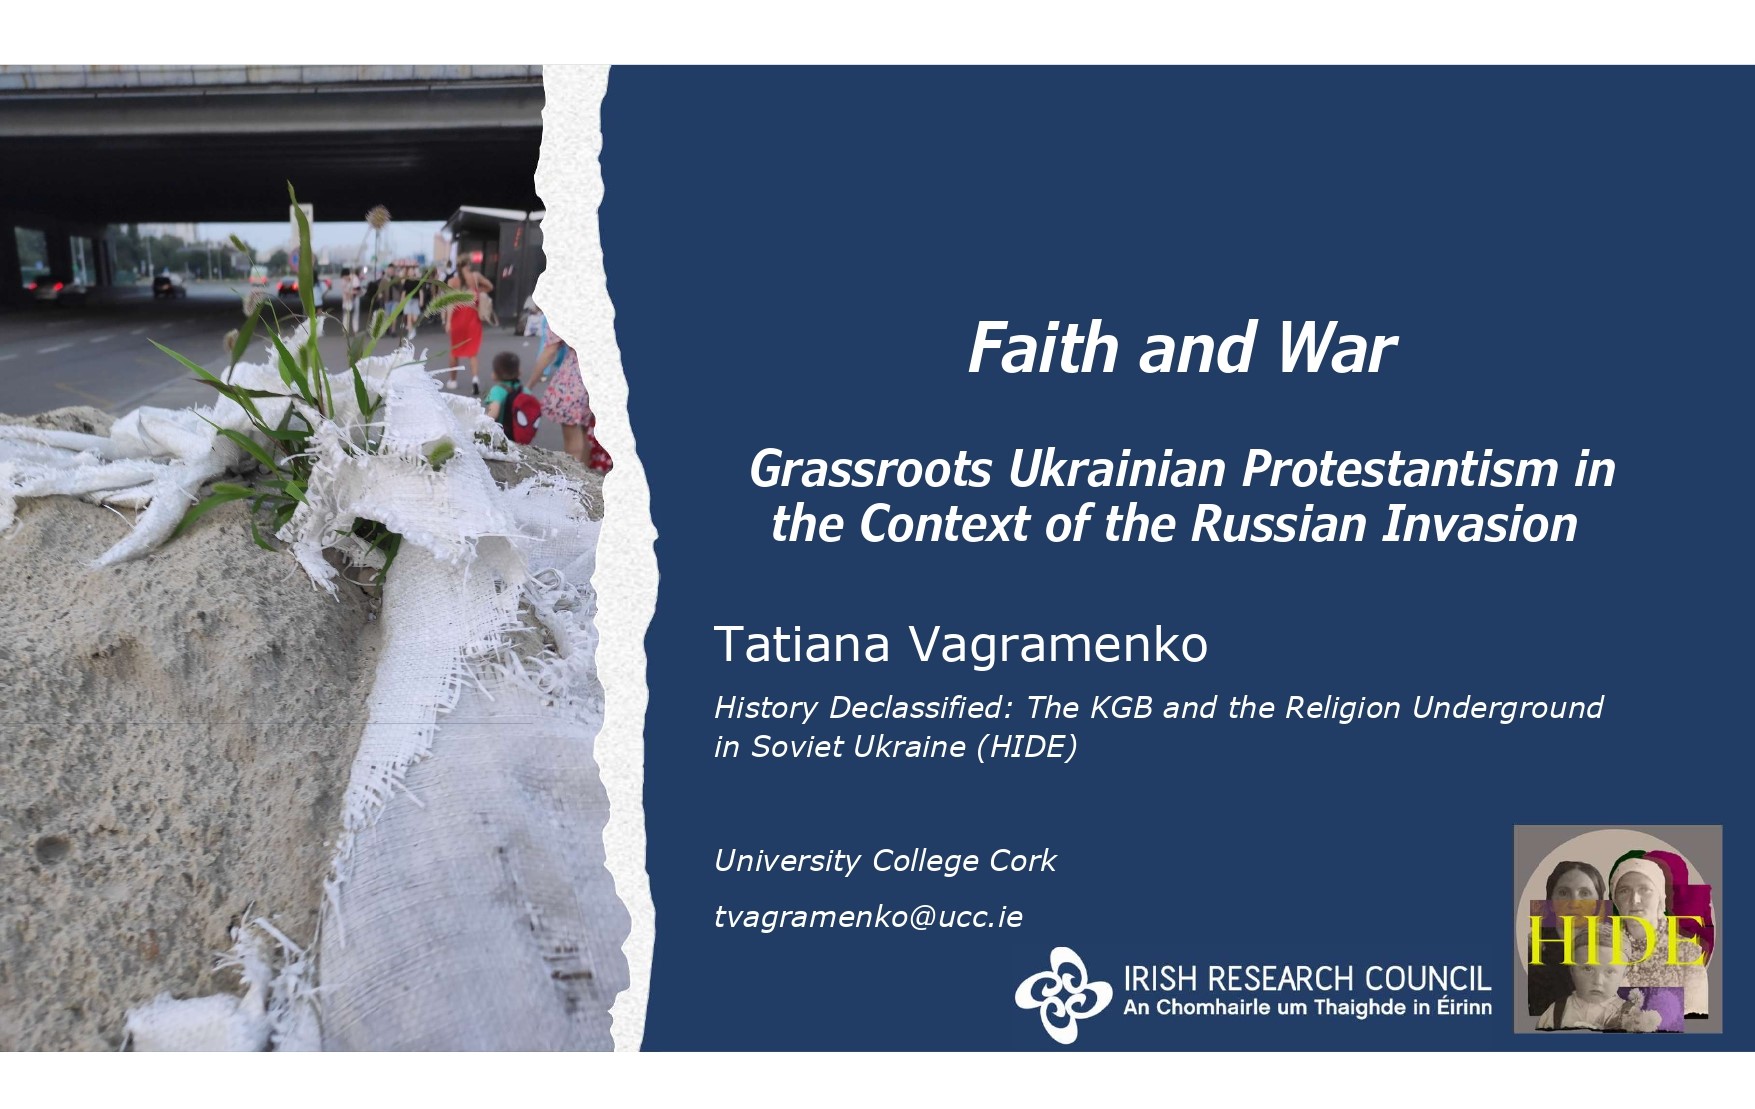 Faith and War: Grassroots Ukrainian Protestantism in the Context of the Russian Invasion